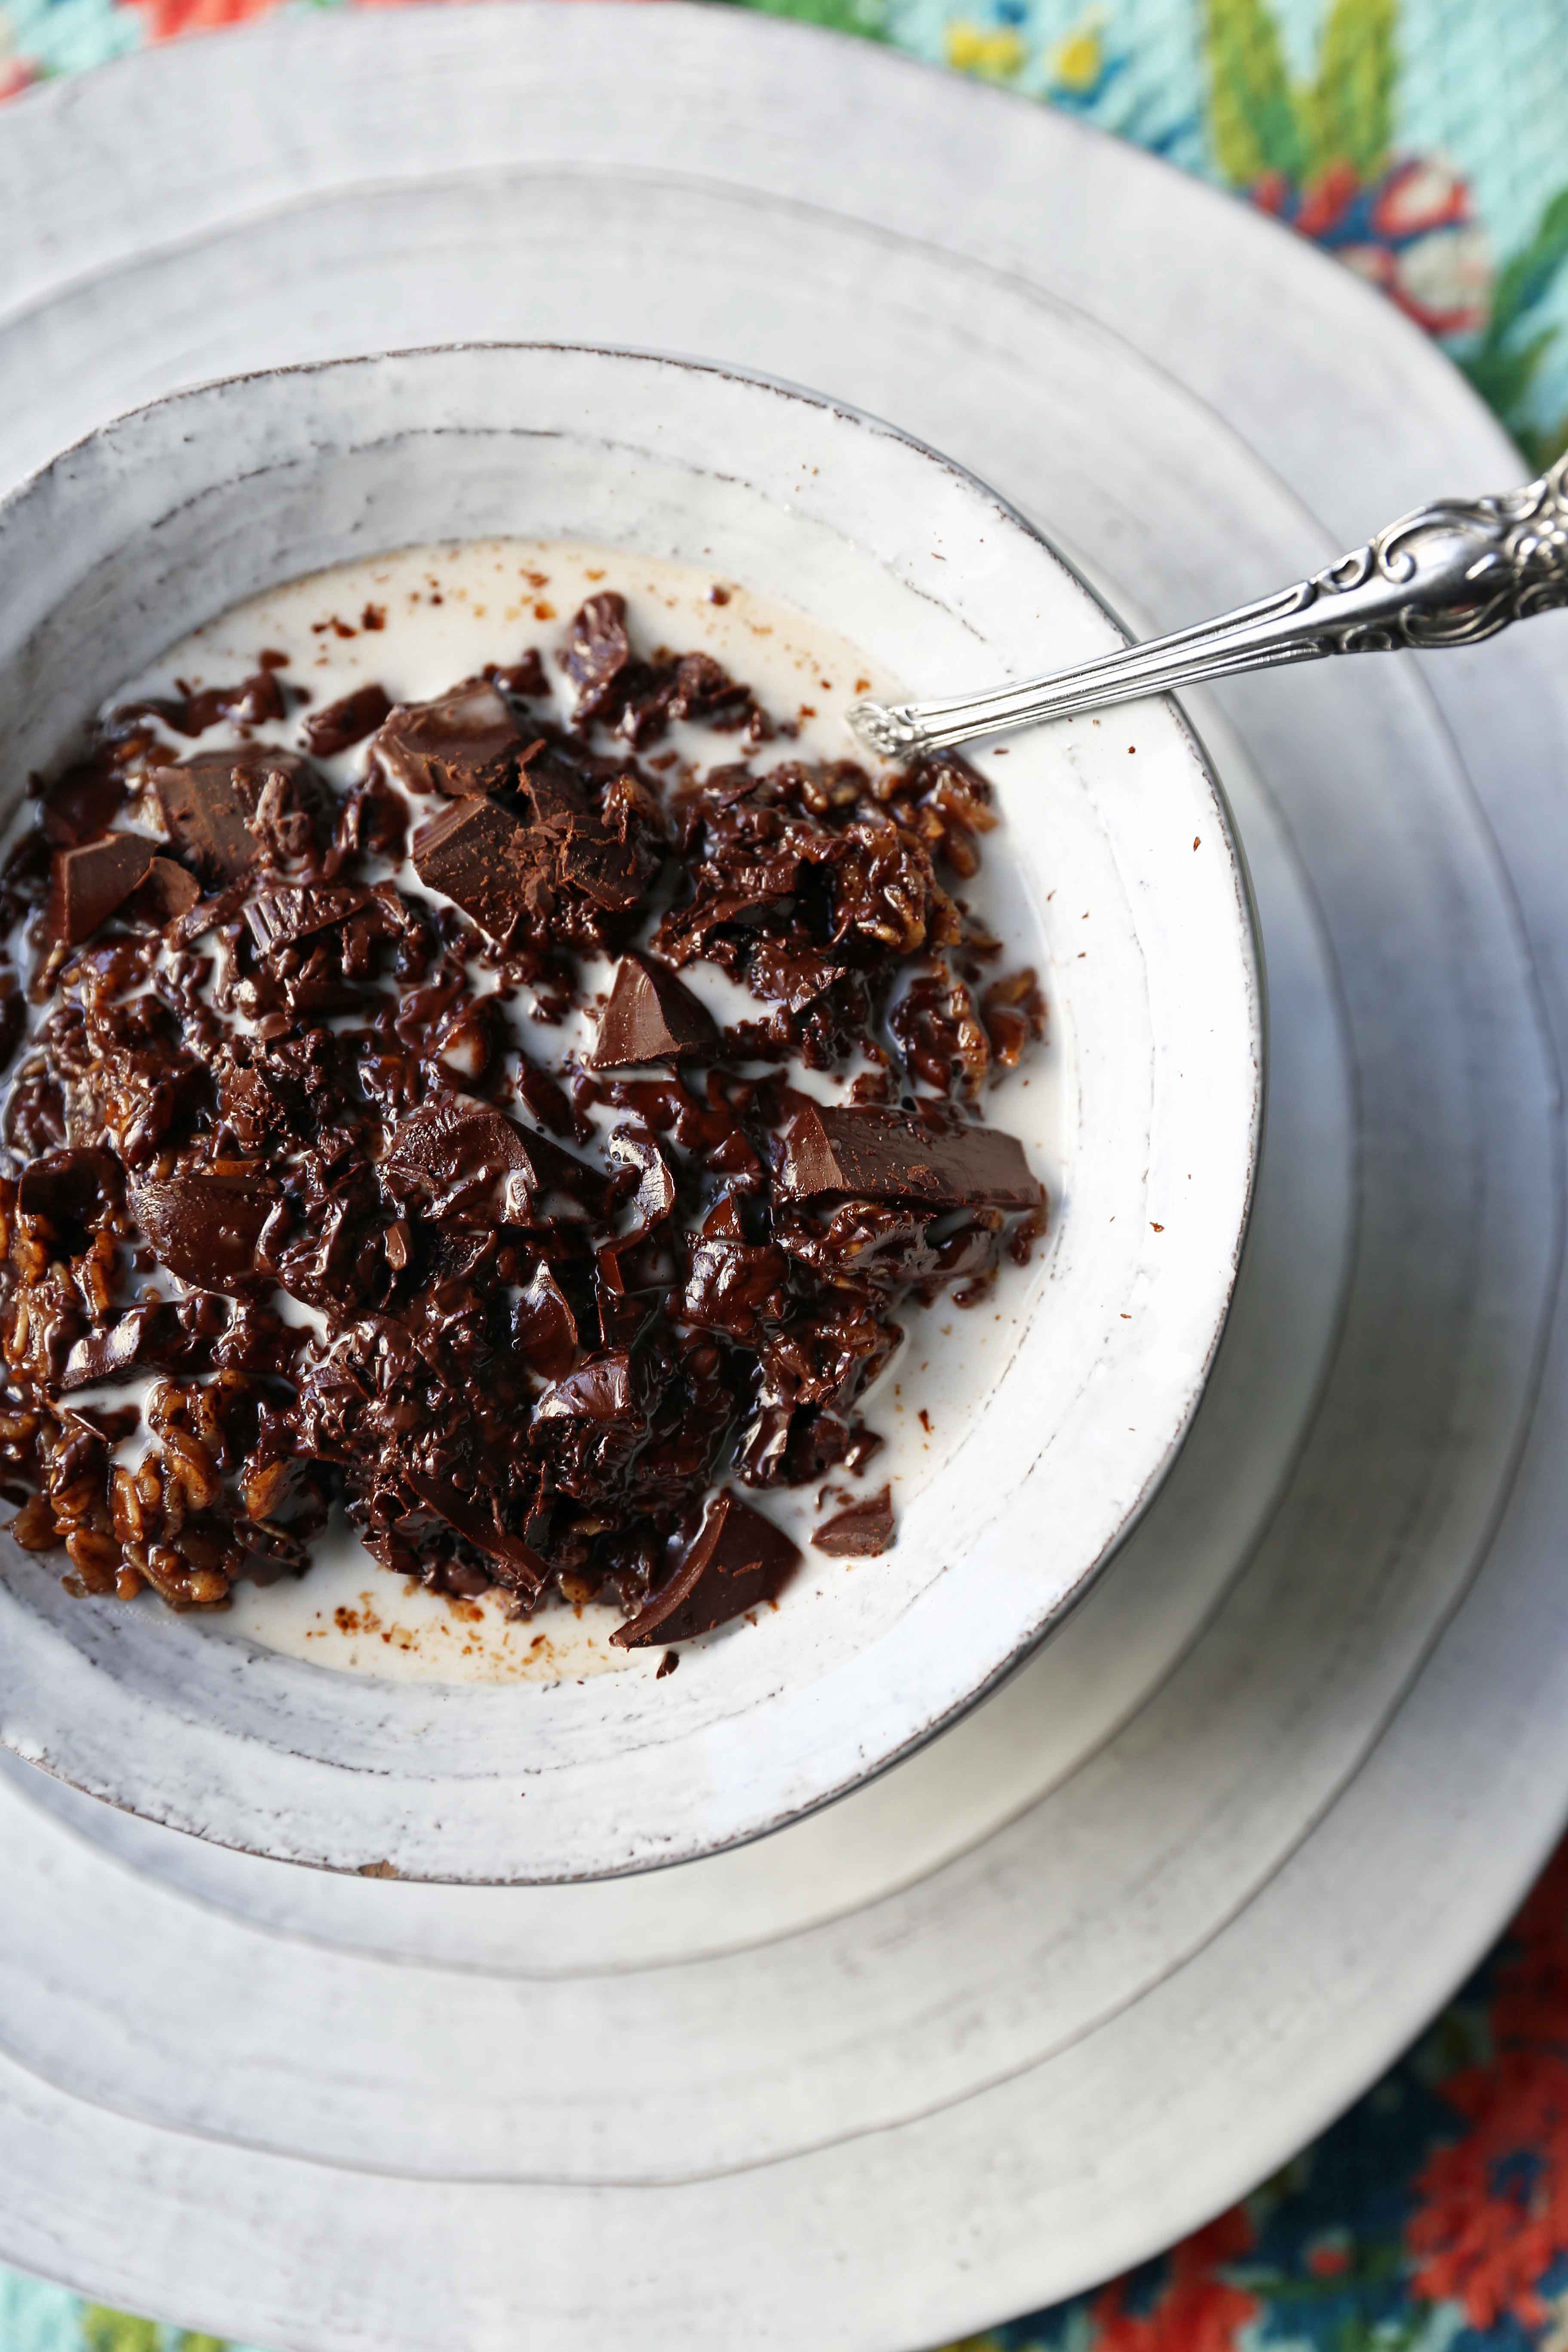 A bowl of decadent double chocolate oatmeal is made with rolled oats mixed with creamy coconut milk, cocoa, lightly sweetened, and topped with chocolate chunks. These creamy chocolate oats are a rich, heavenly breakfast!